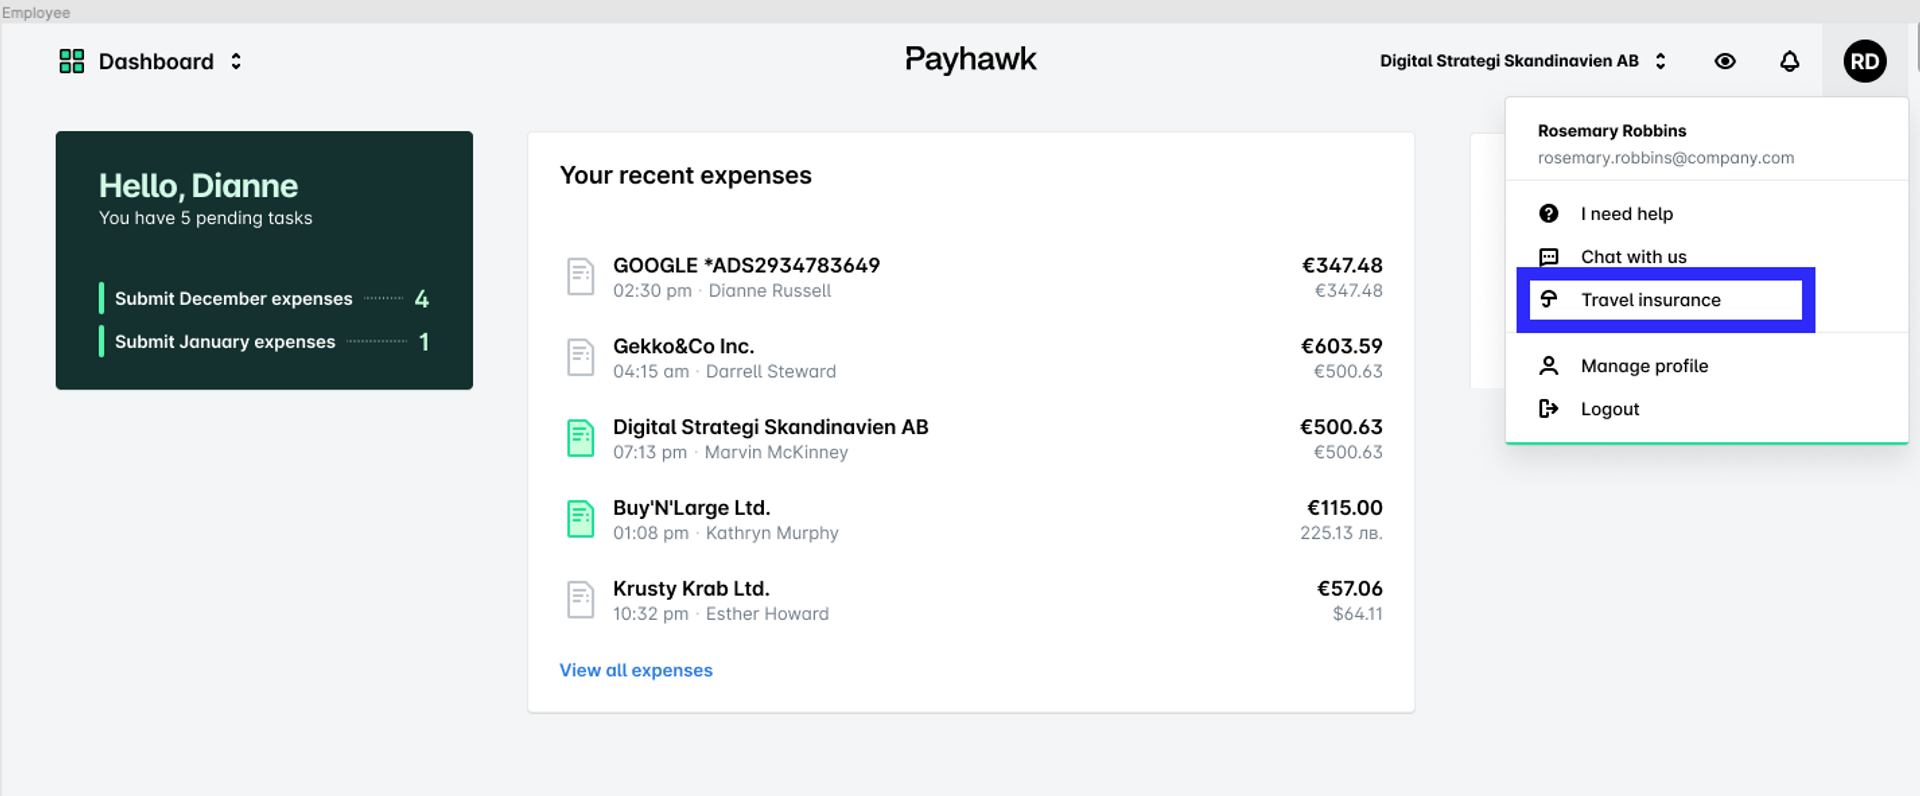 A screenshot of the Payhawk spend management solution, showing where the free travel insurance button is located.